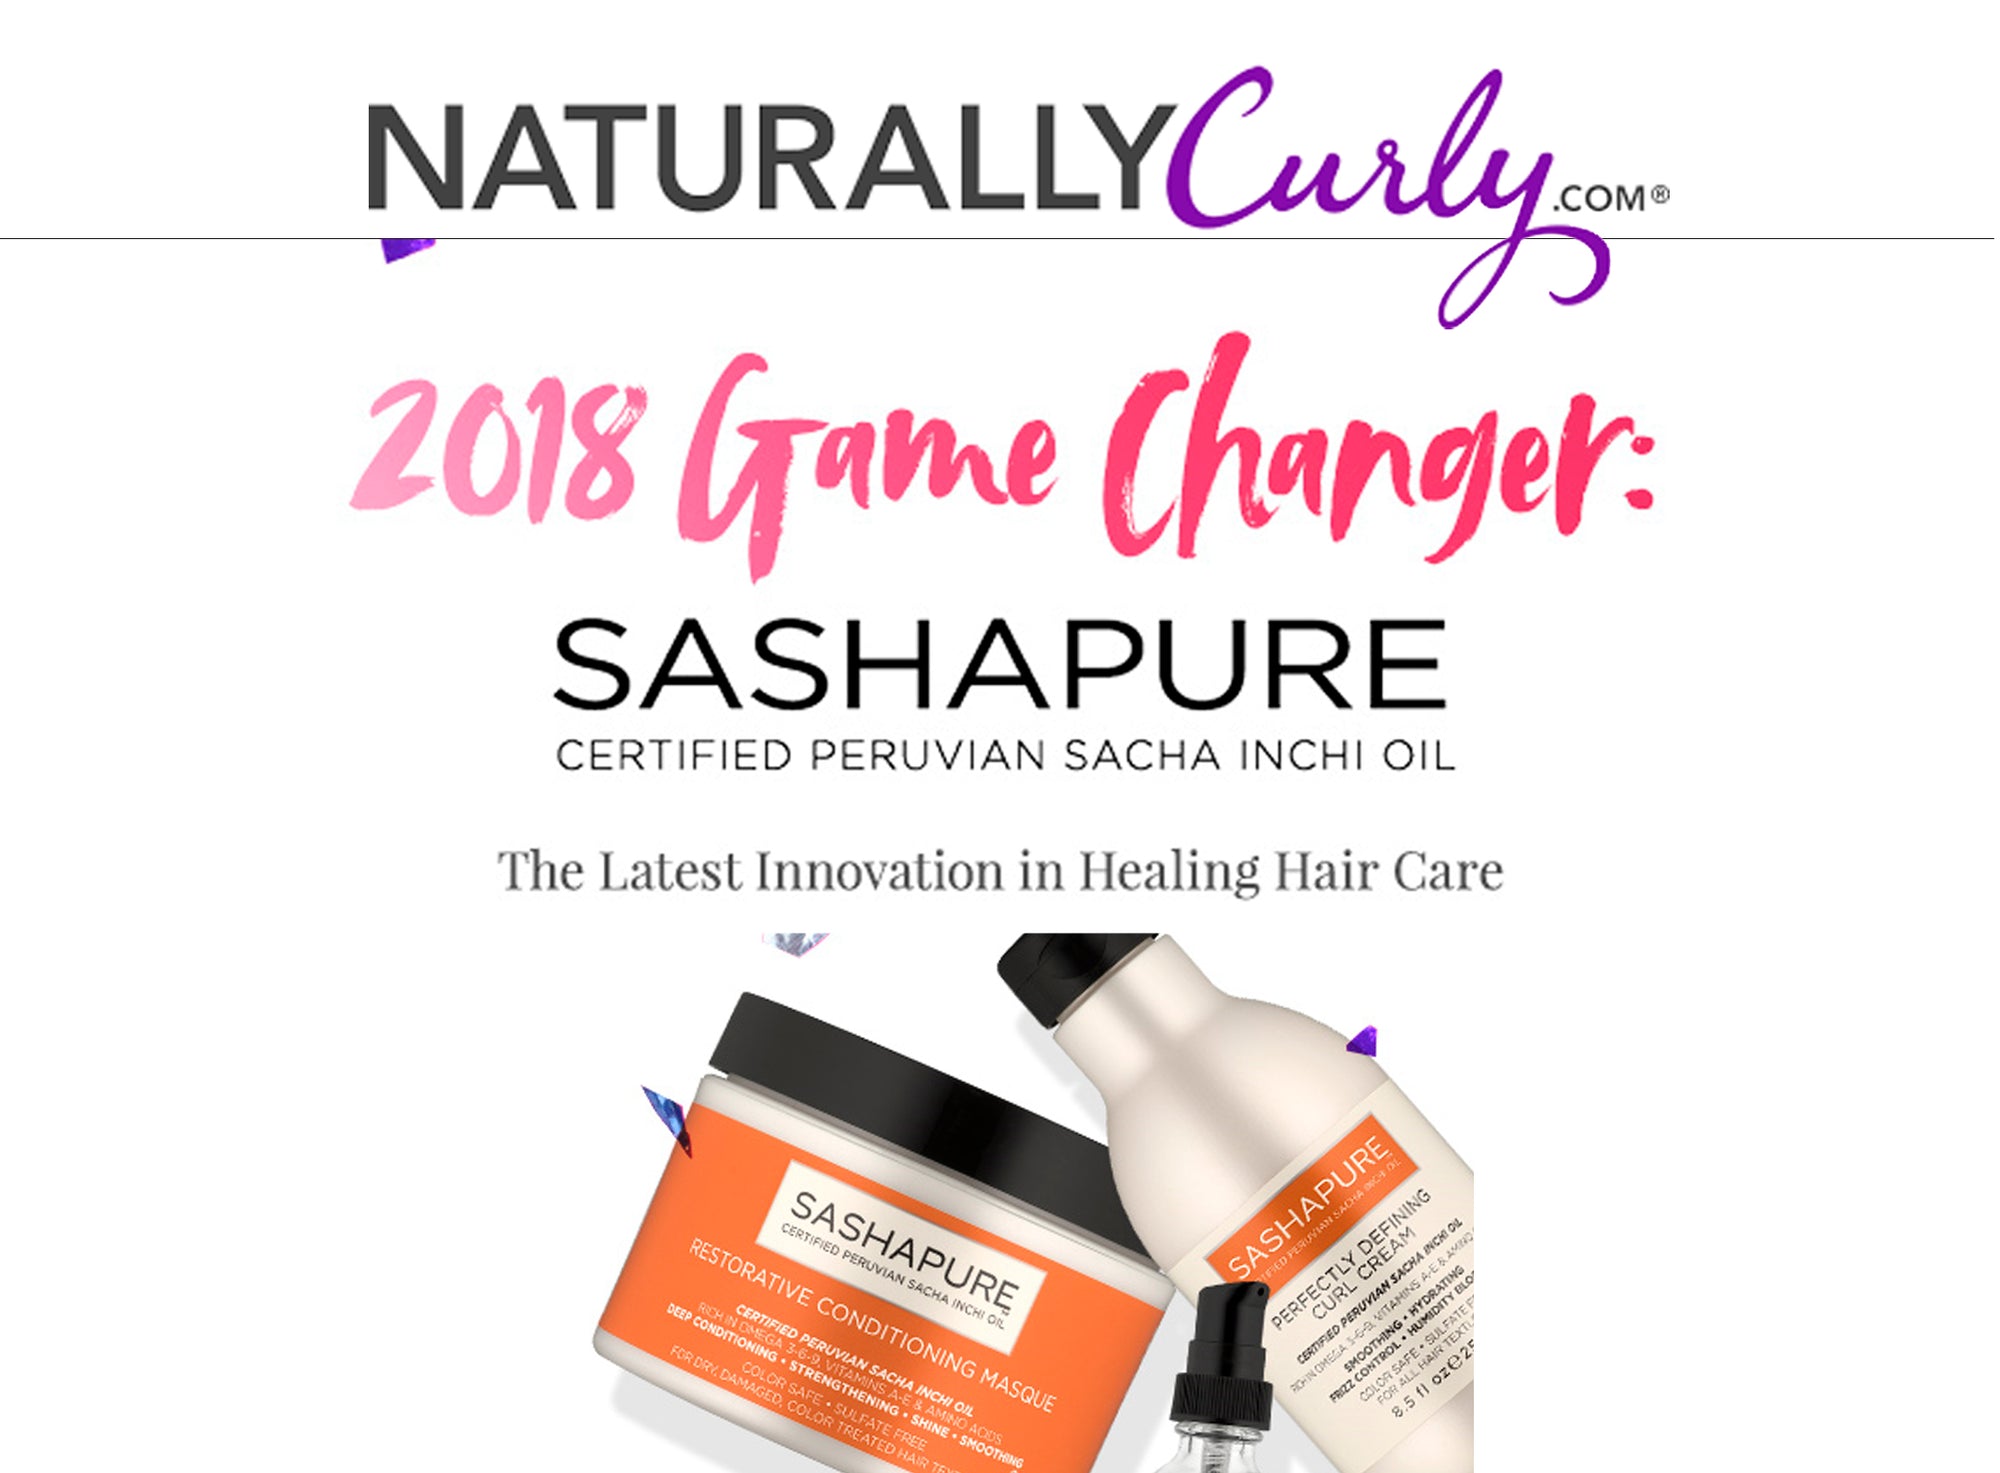 2018 Game Changer  Naturallycurly.com